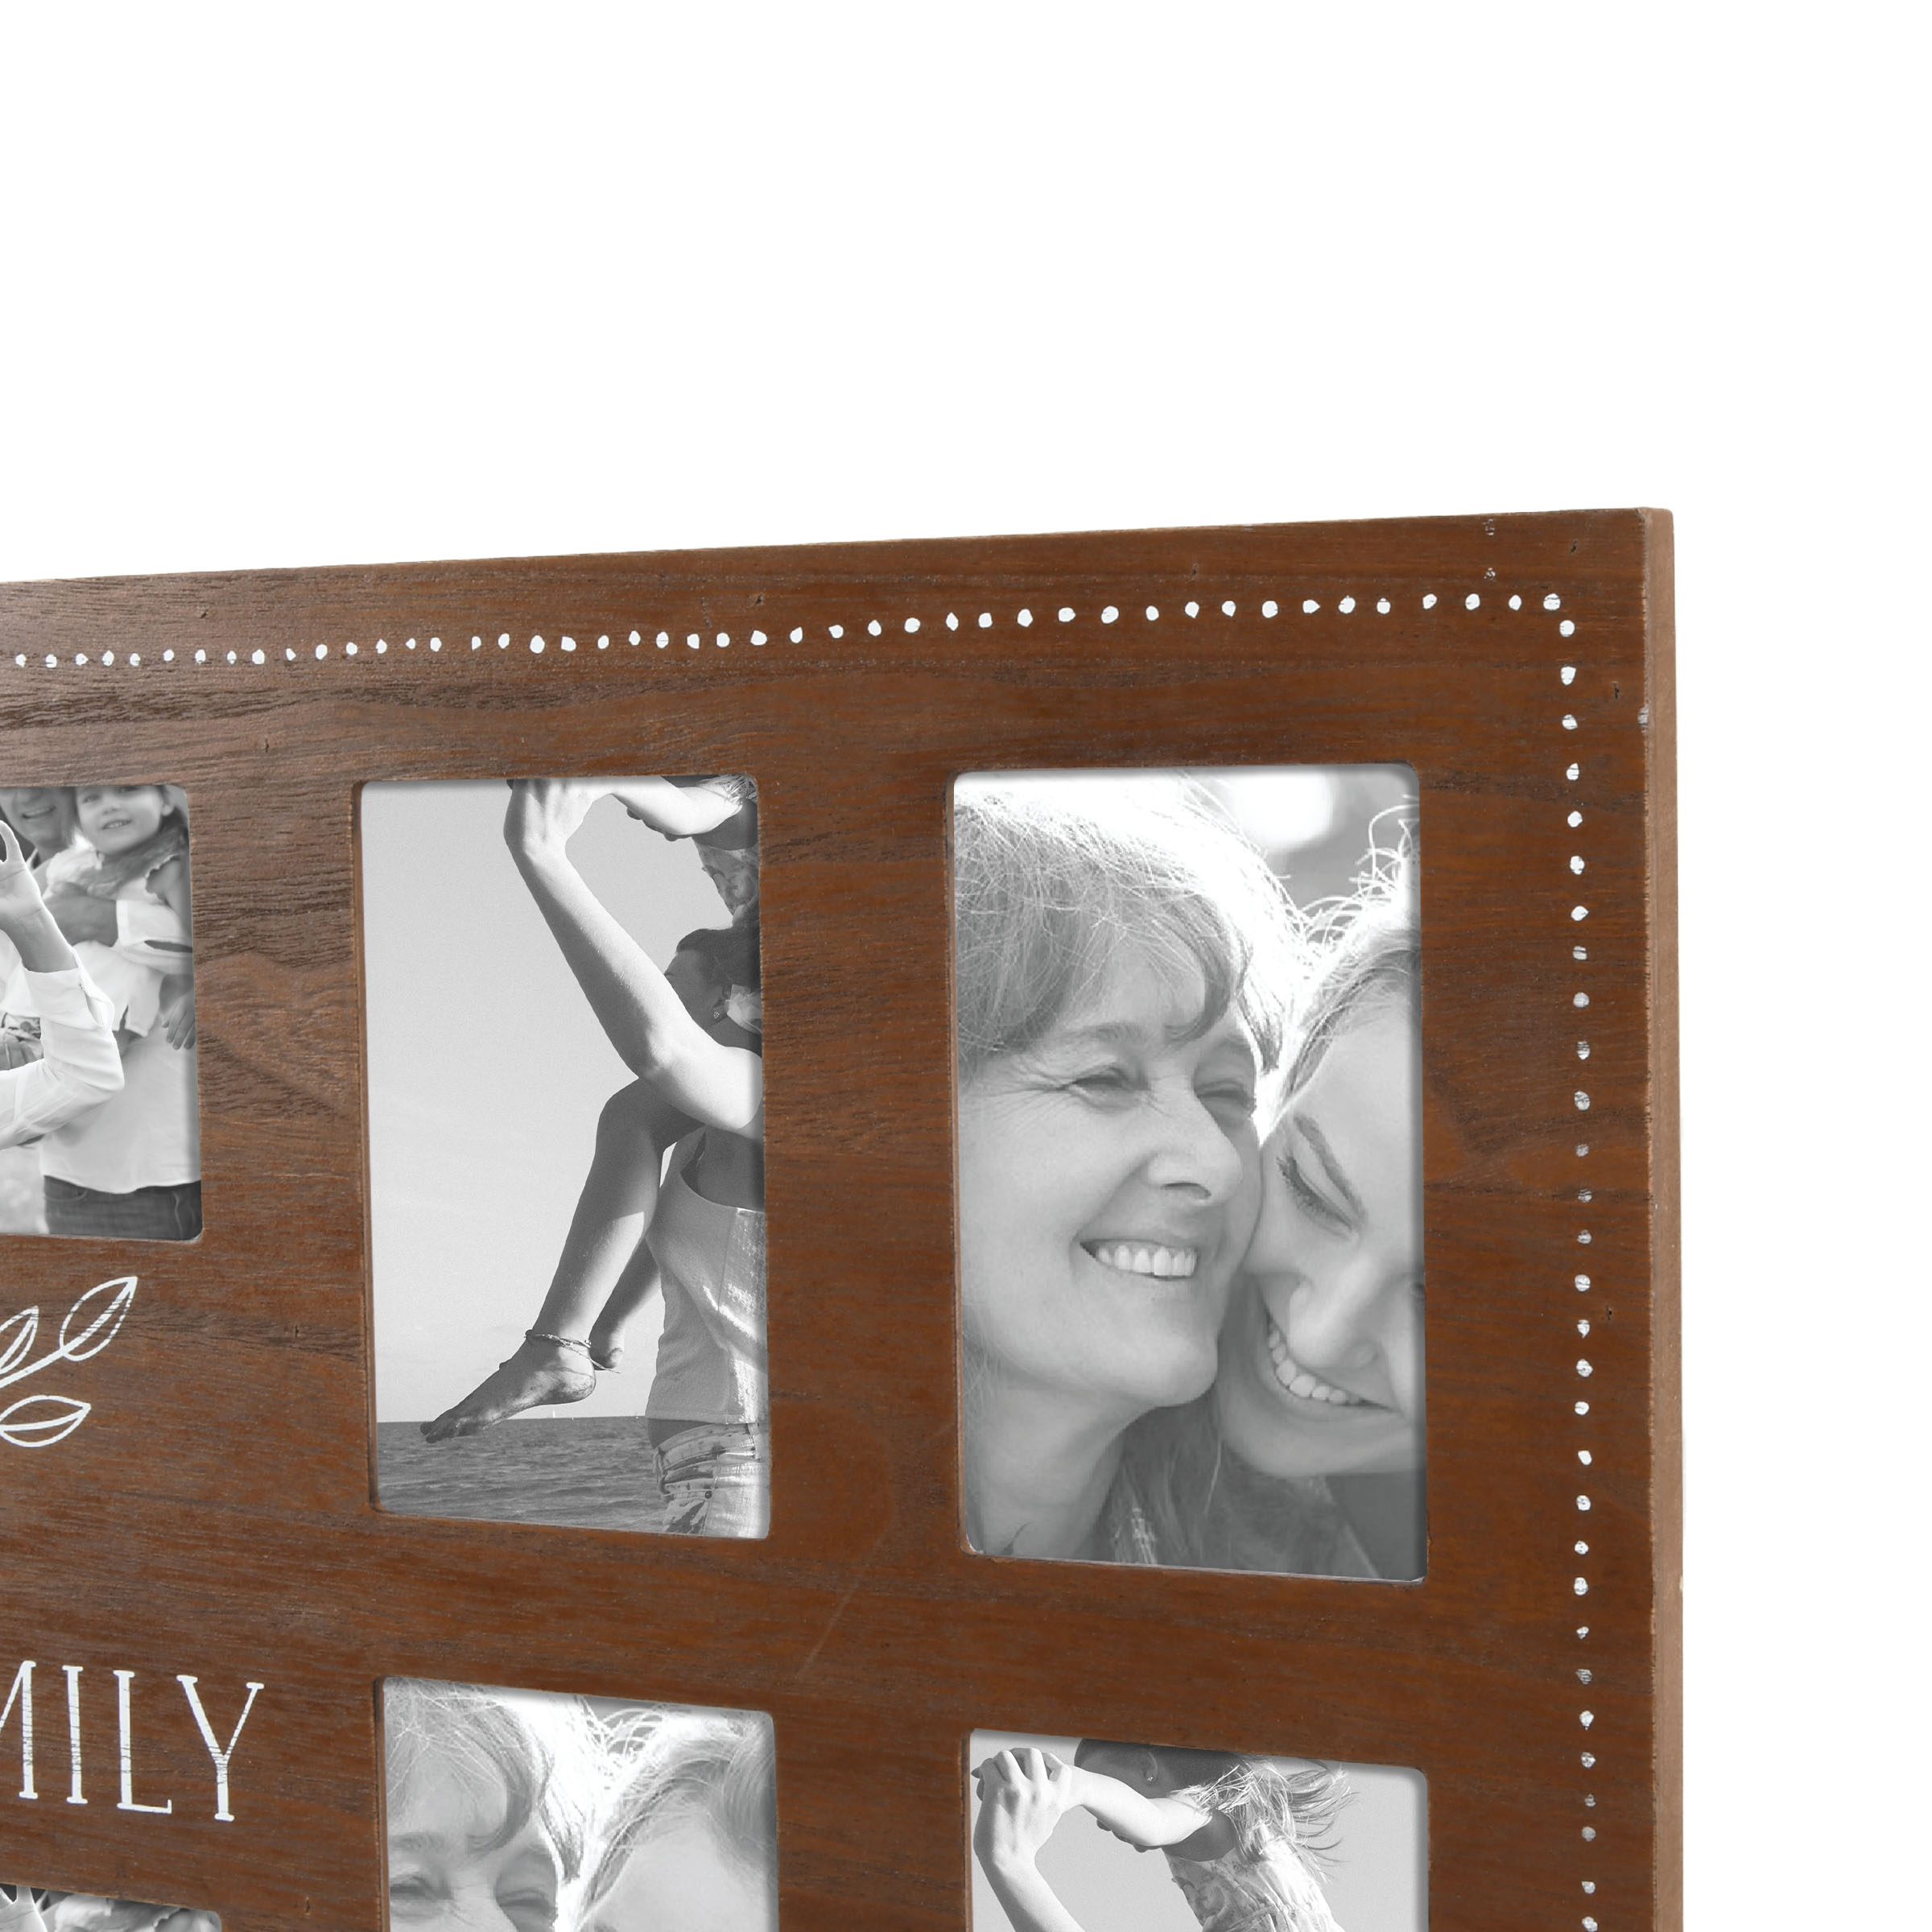 Prinz 12-Opening 'Together' Wall Hanging Collage Picture Frame, for 4"x6" Photos, Dark Brown - image 4 of 5